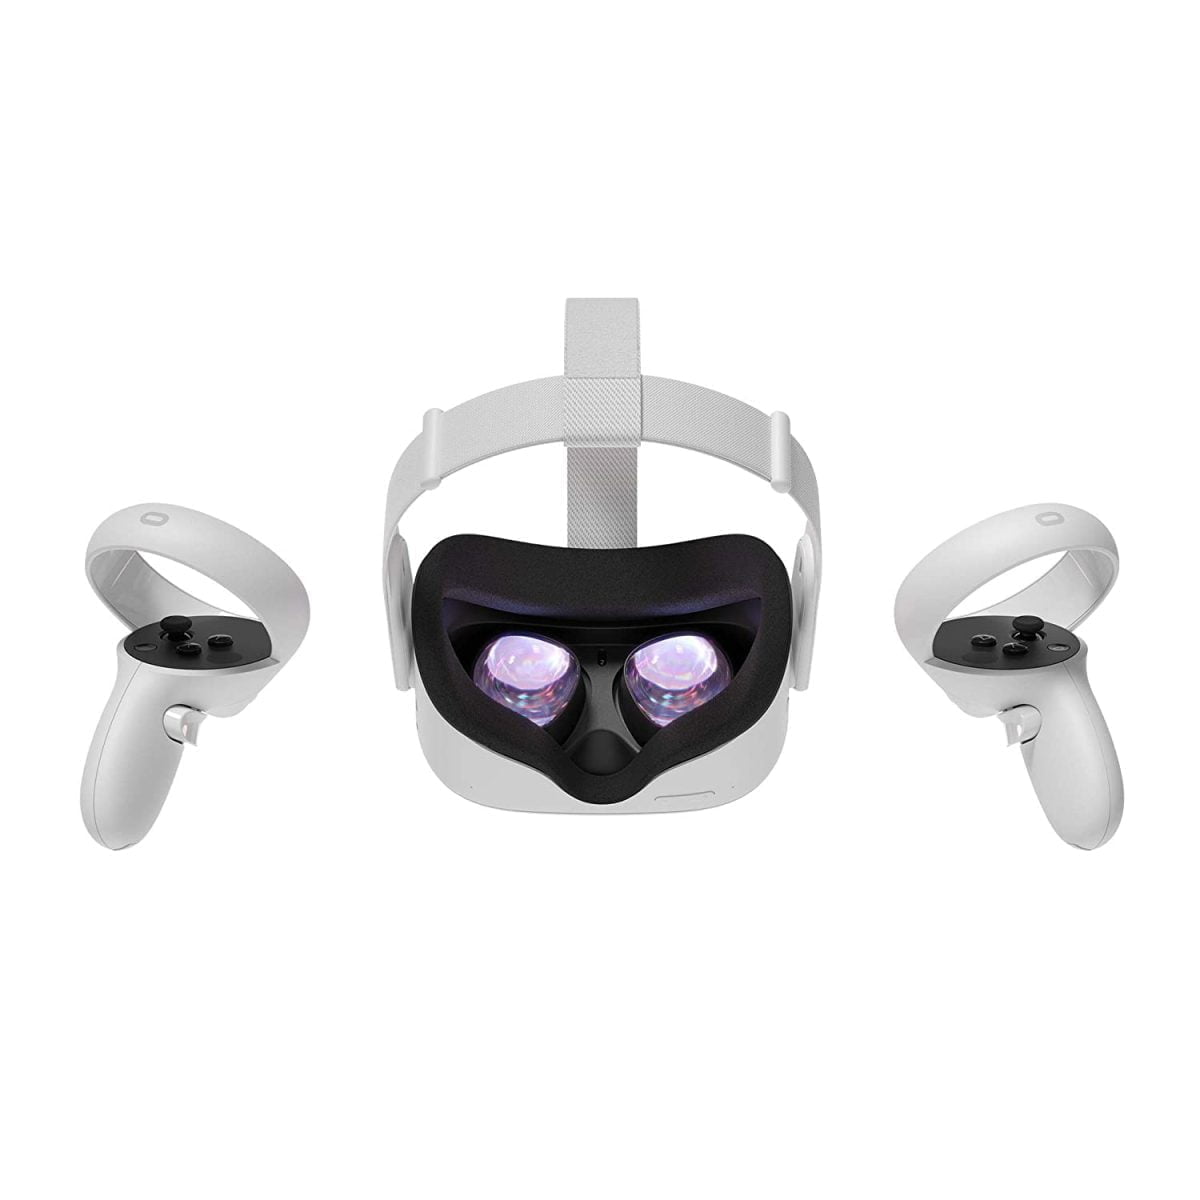 61Lspm4H5L. Sl1500 Oculus Https://Youtu.be/Atvgl9Wojsm Oculus Quest 2 Oculus Quest 2 256 Gb With Oculus Link Cable 5M Plus Advanced All-In-One Virtual Reality Headset (Combo Offer)